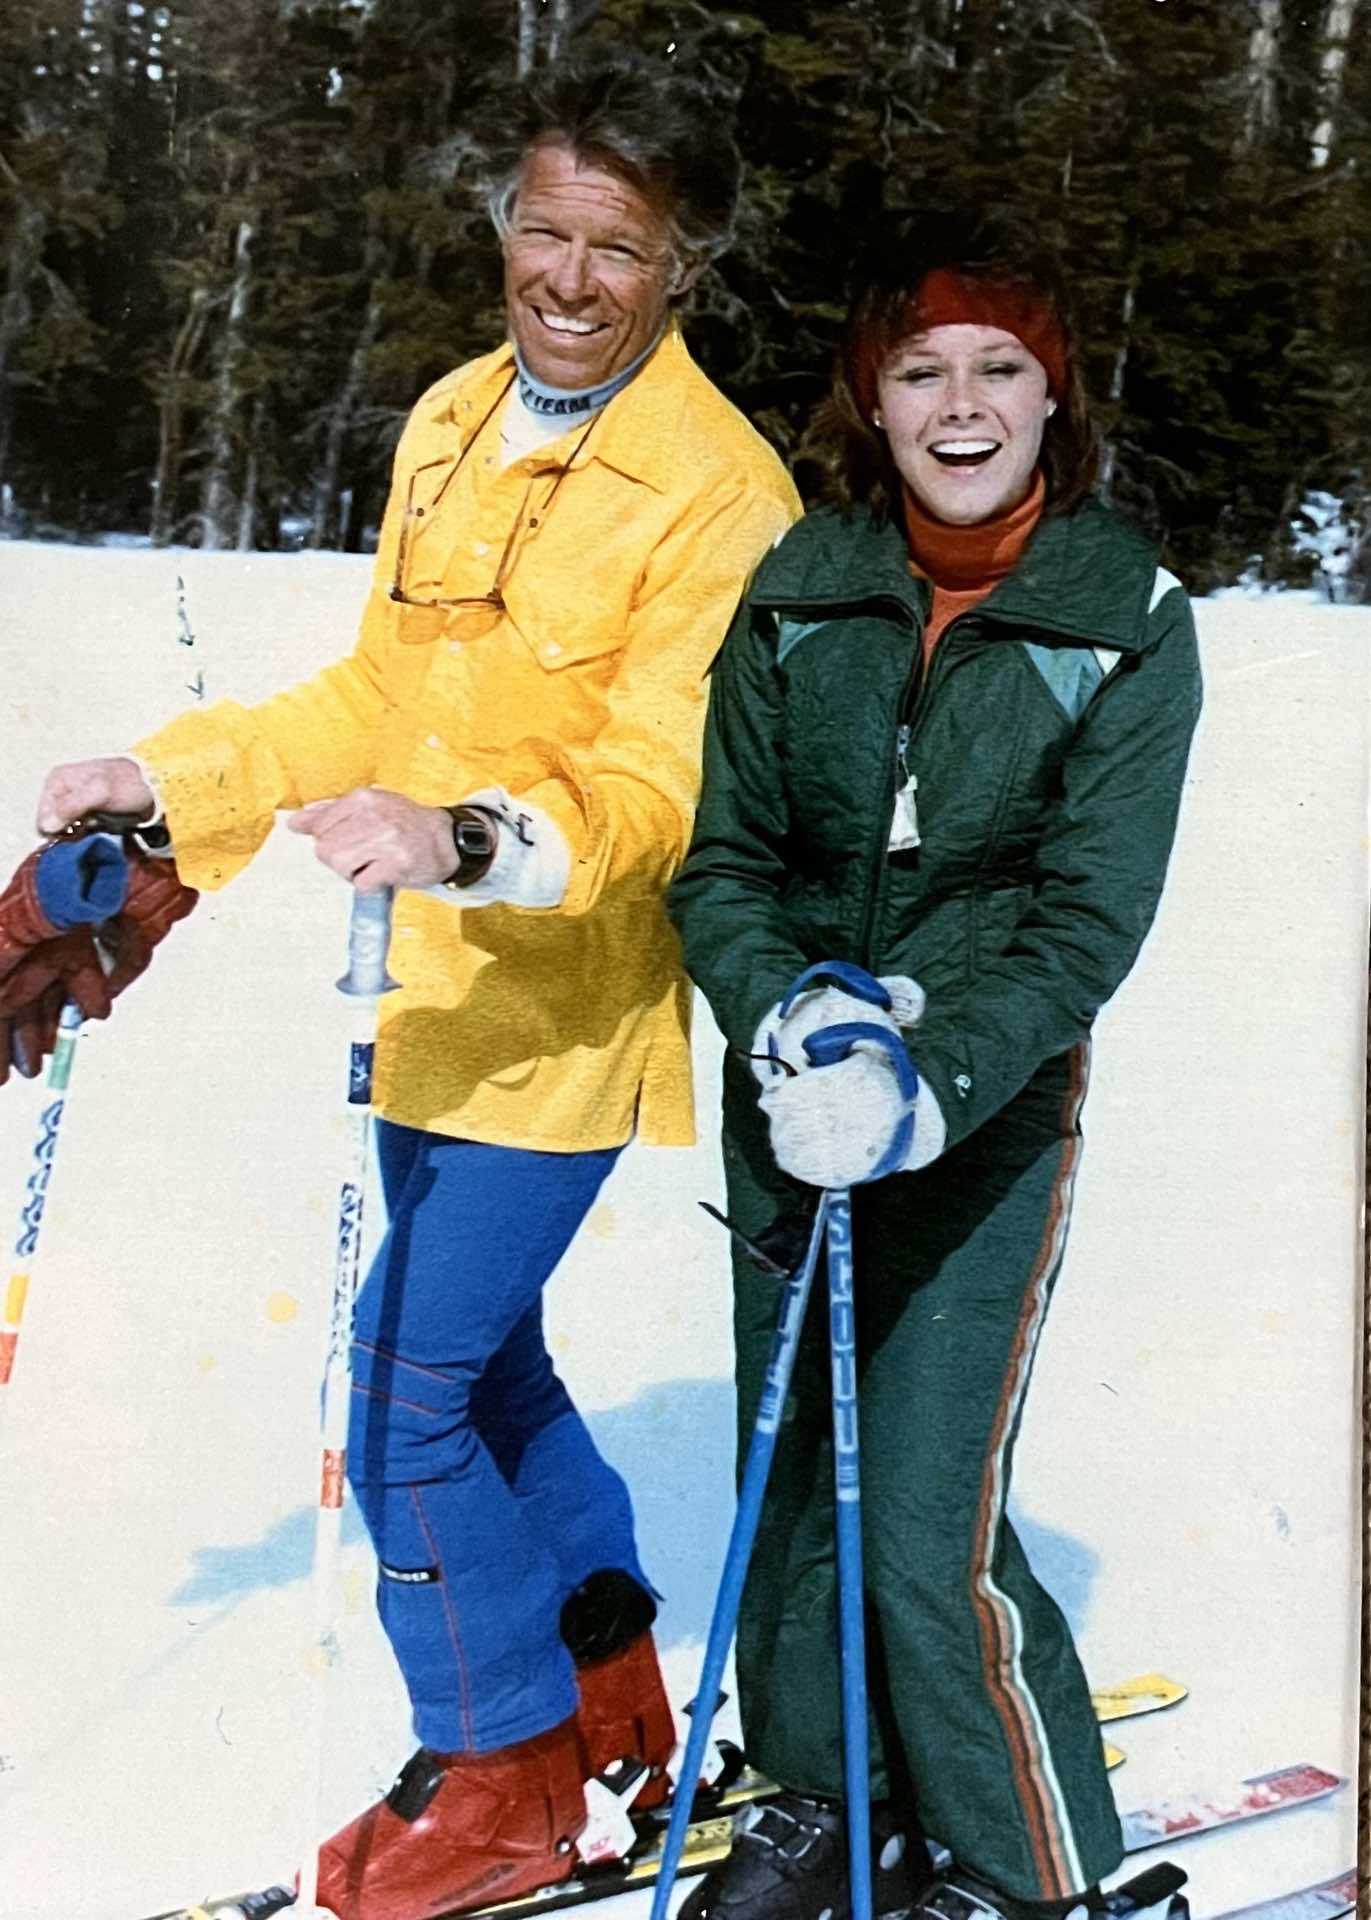 Lisa Christopher and her father skiing in 1984